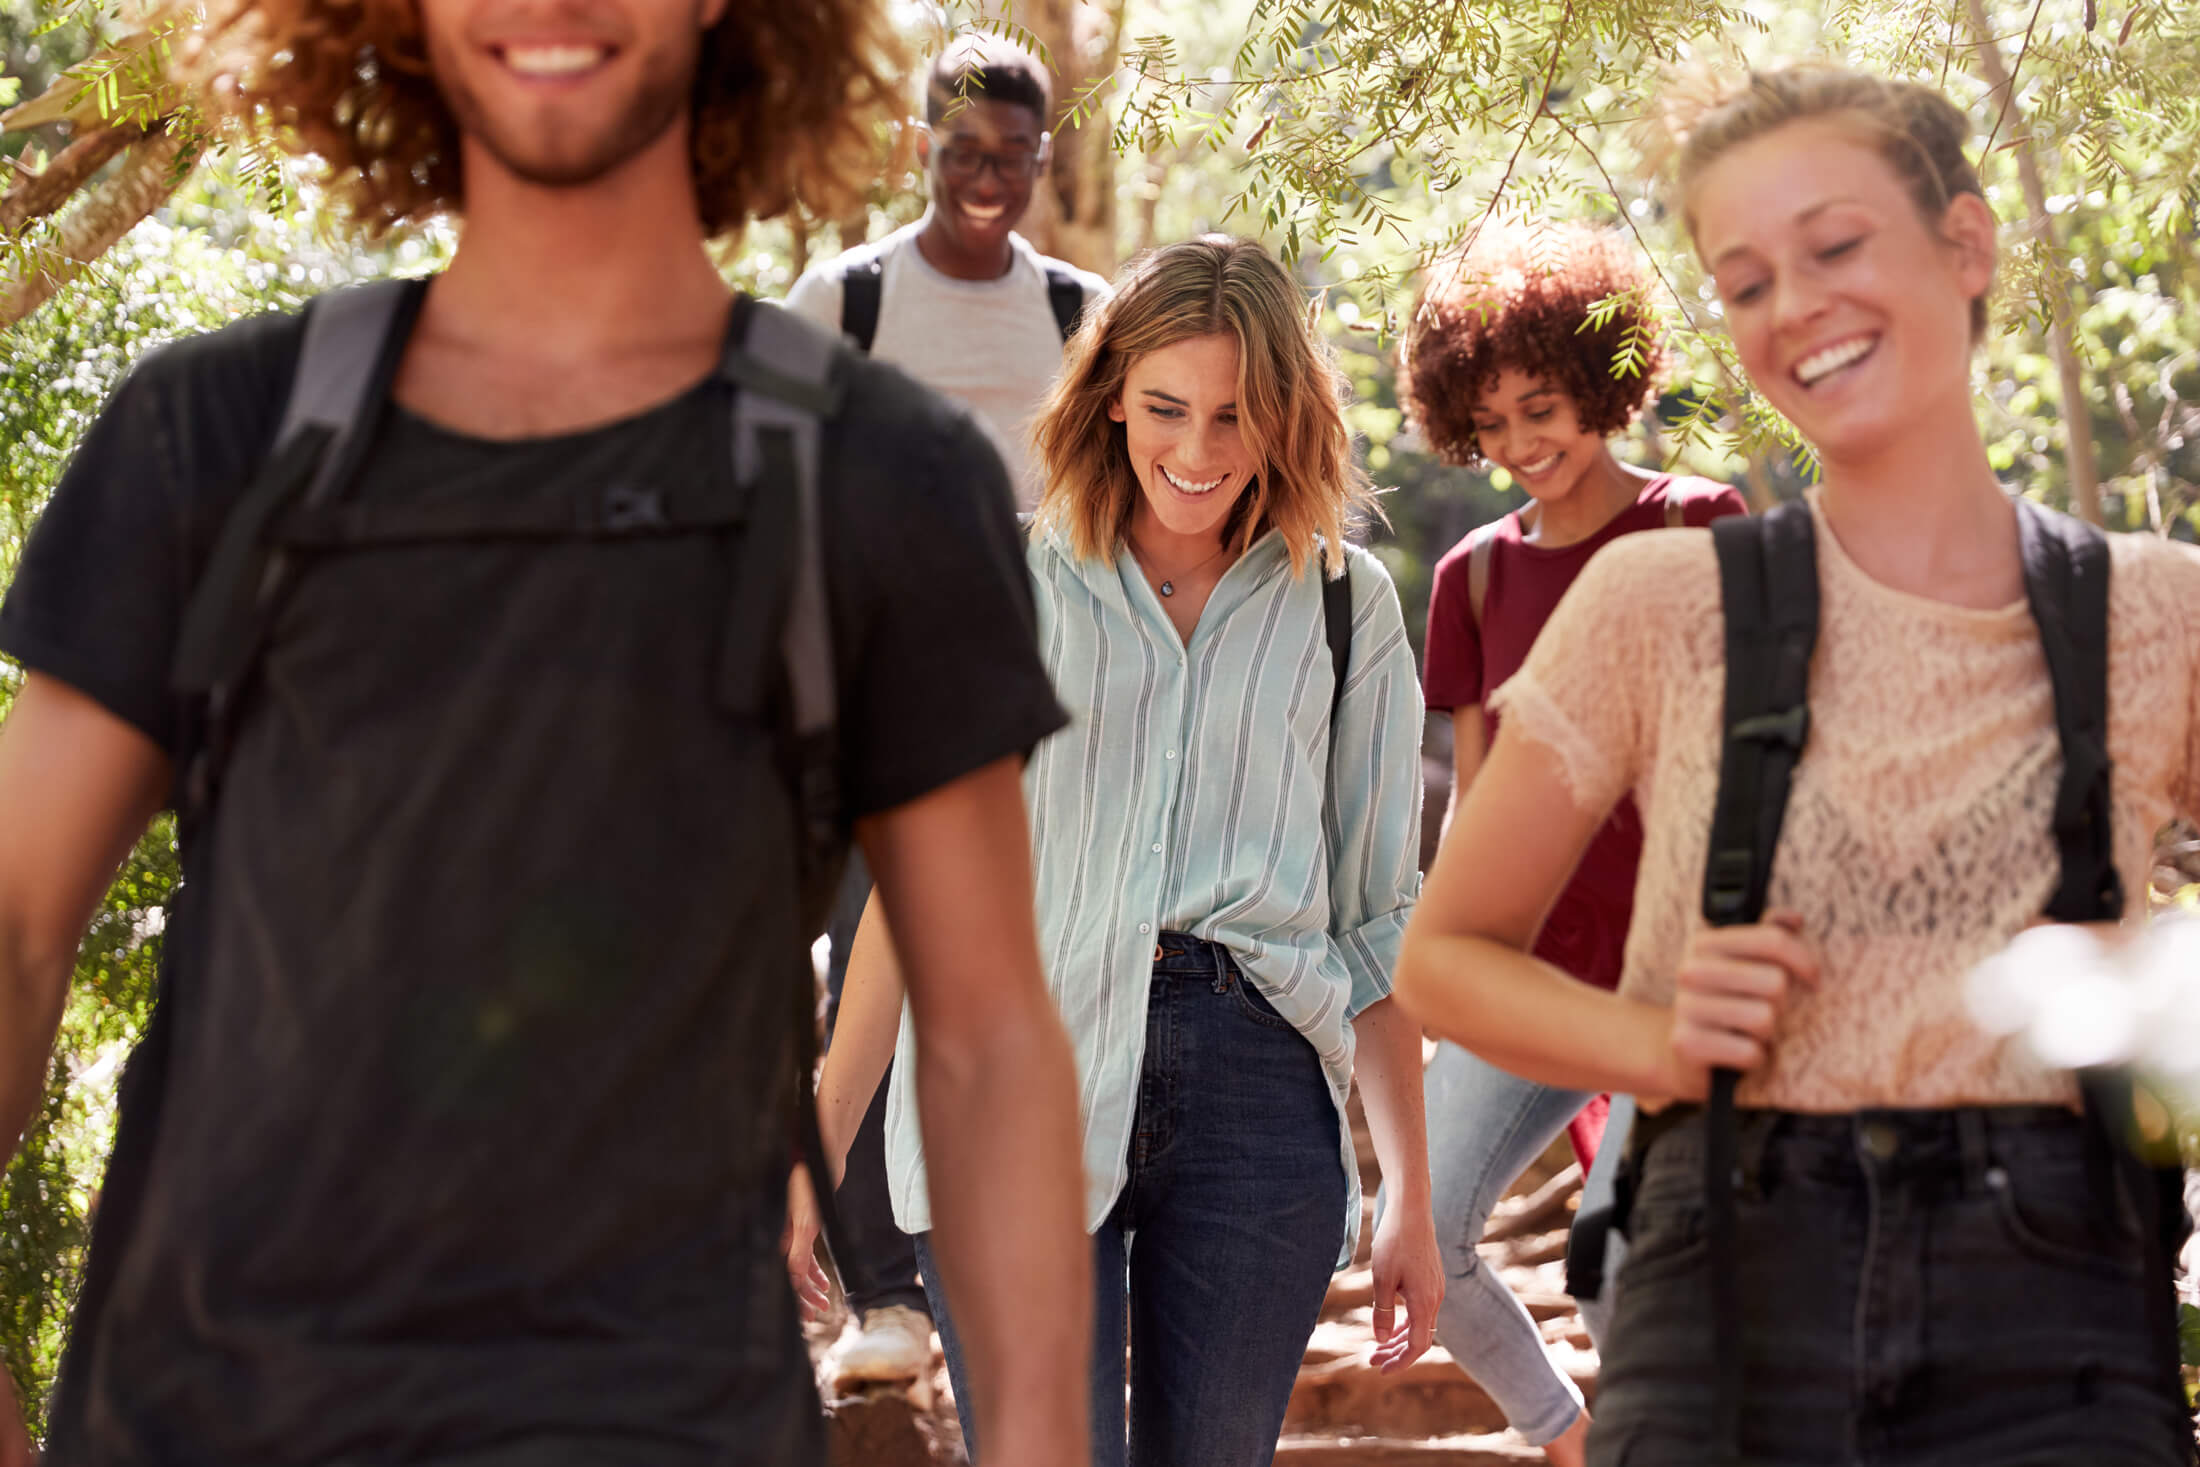 group of people with backpacks walking